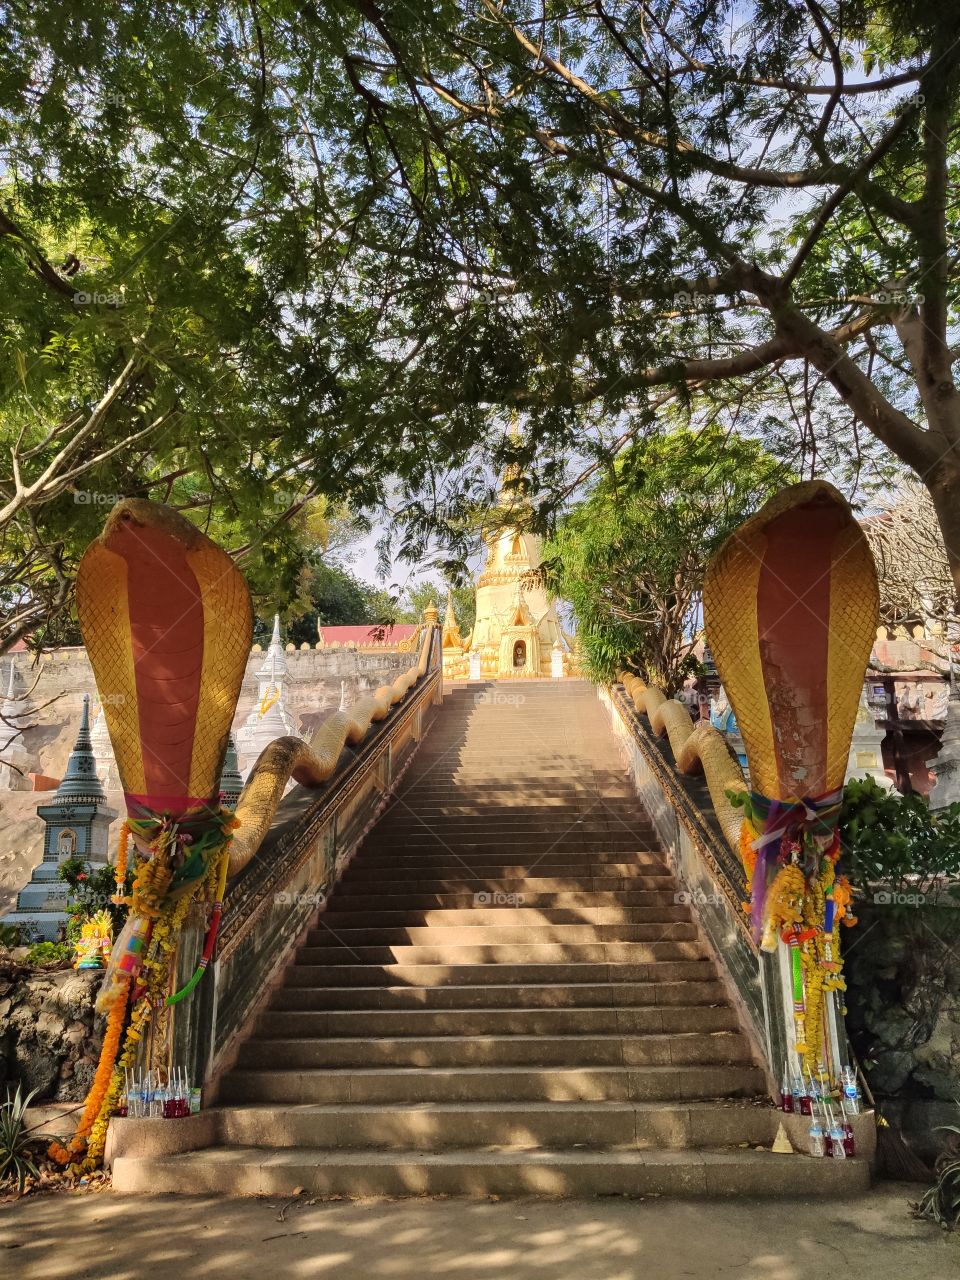 Stairs in the temple